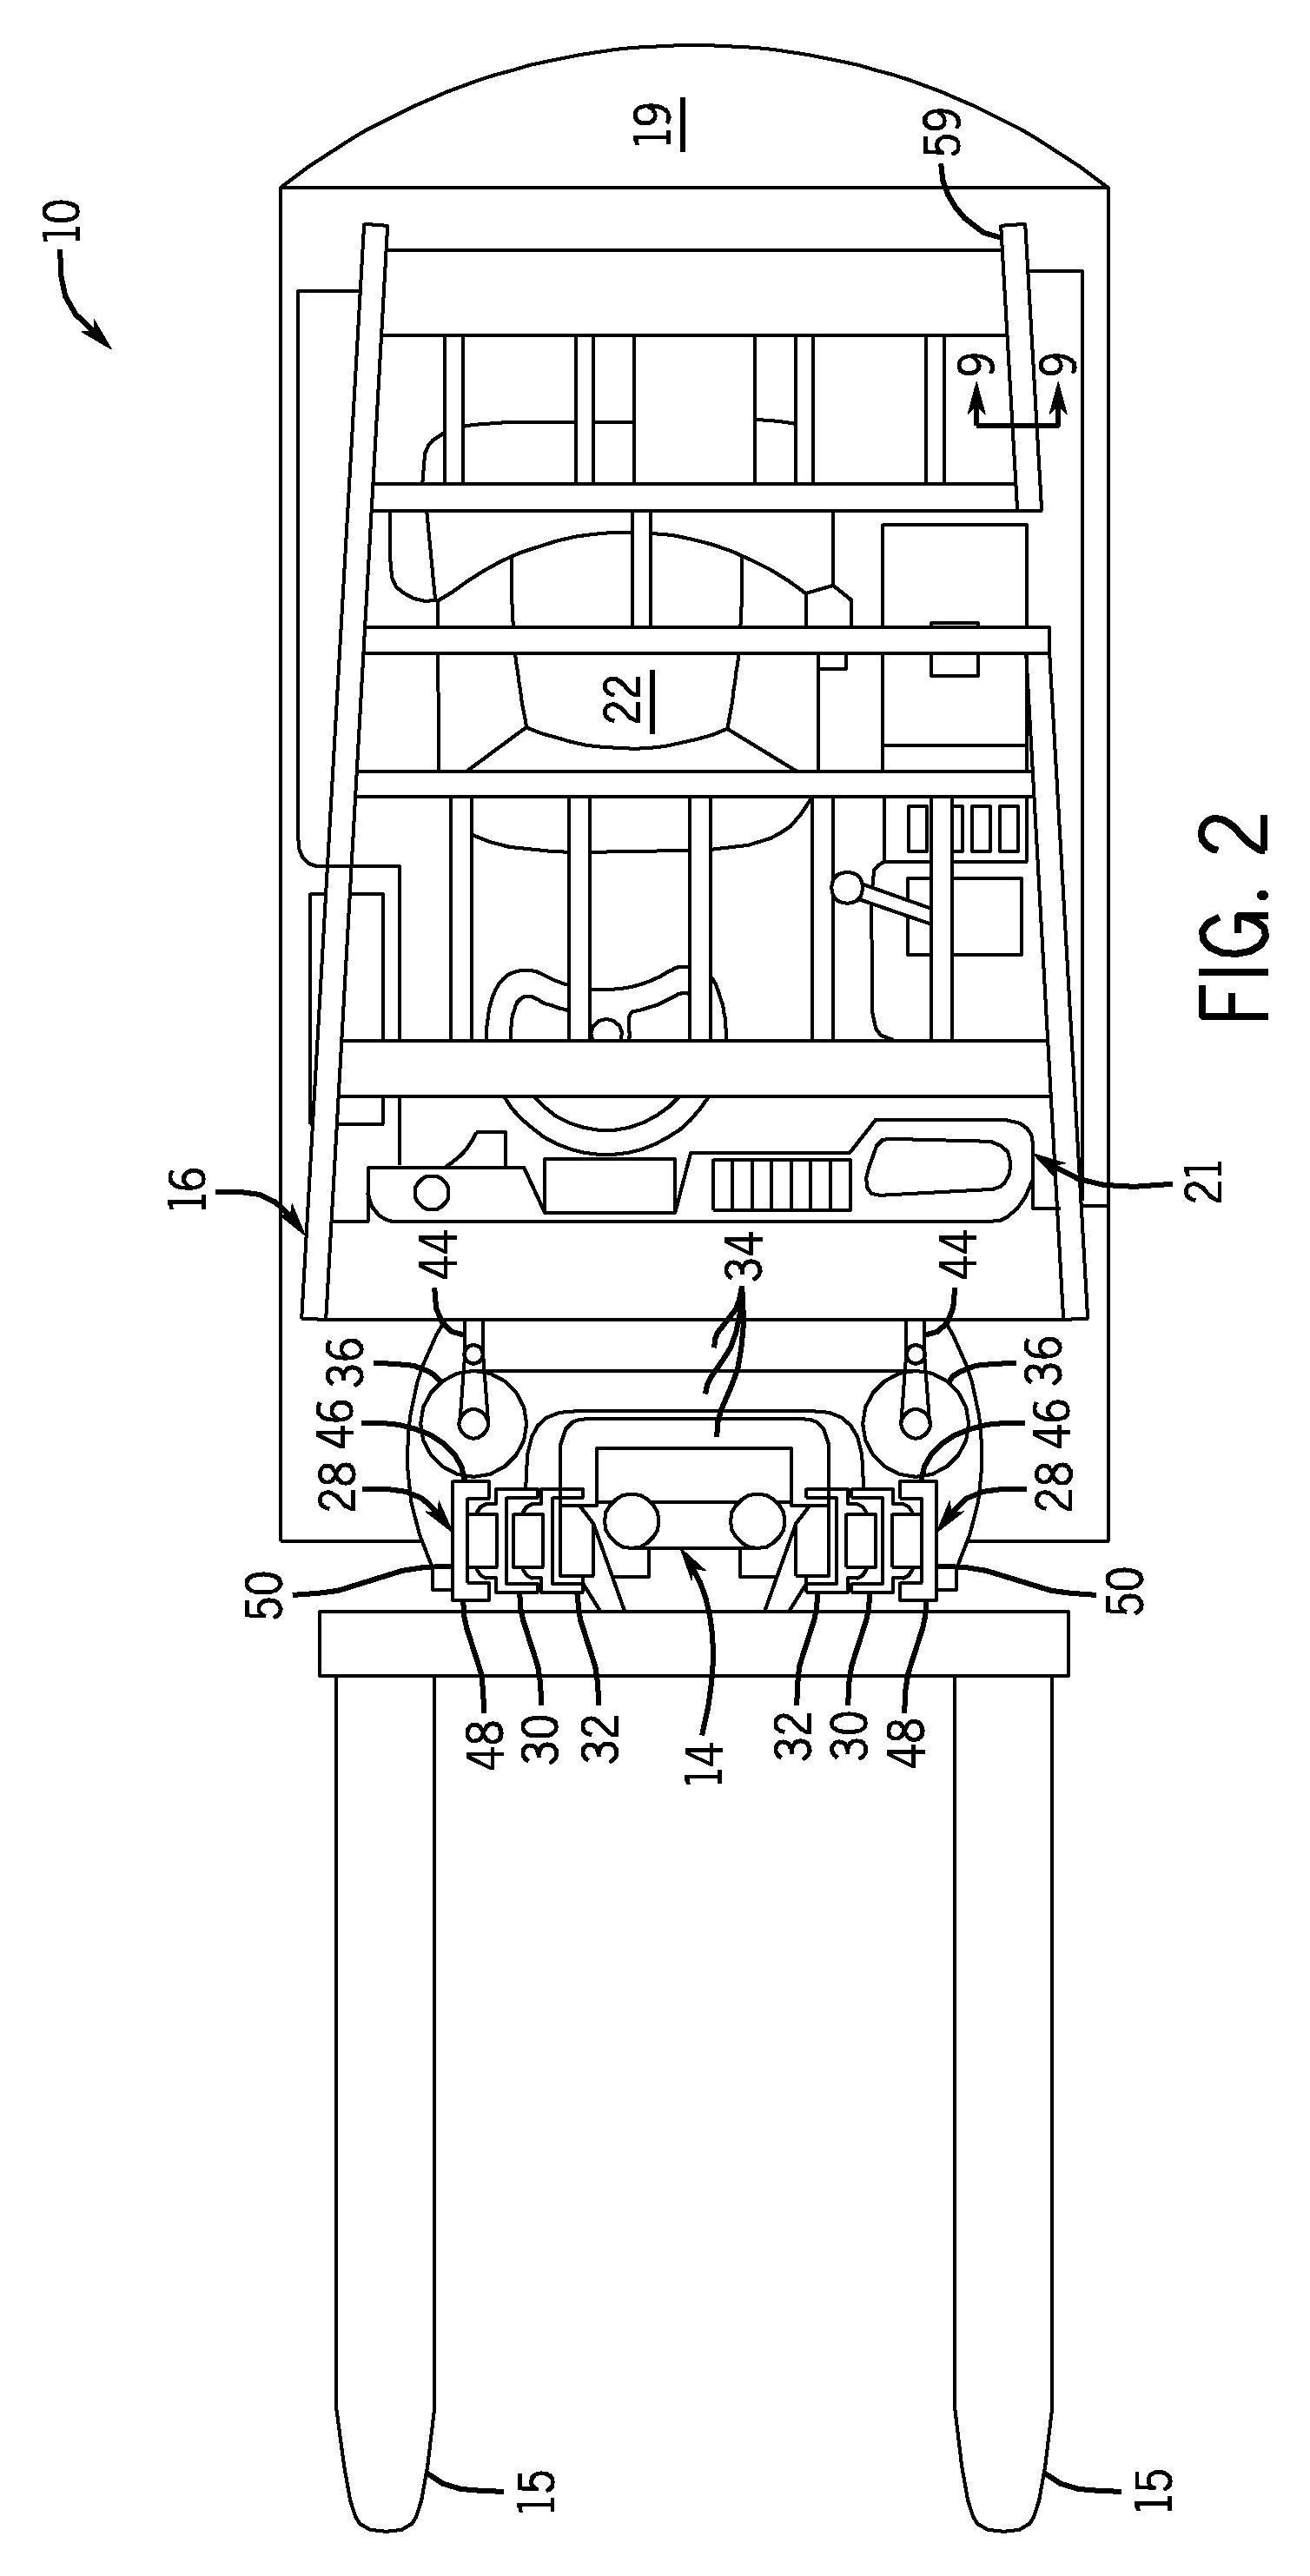 Material handling vehicle including integrated hydrogen storage